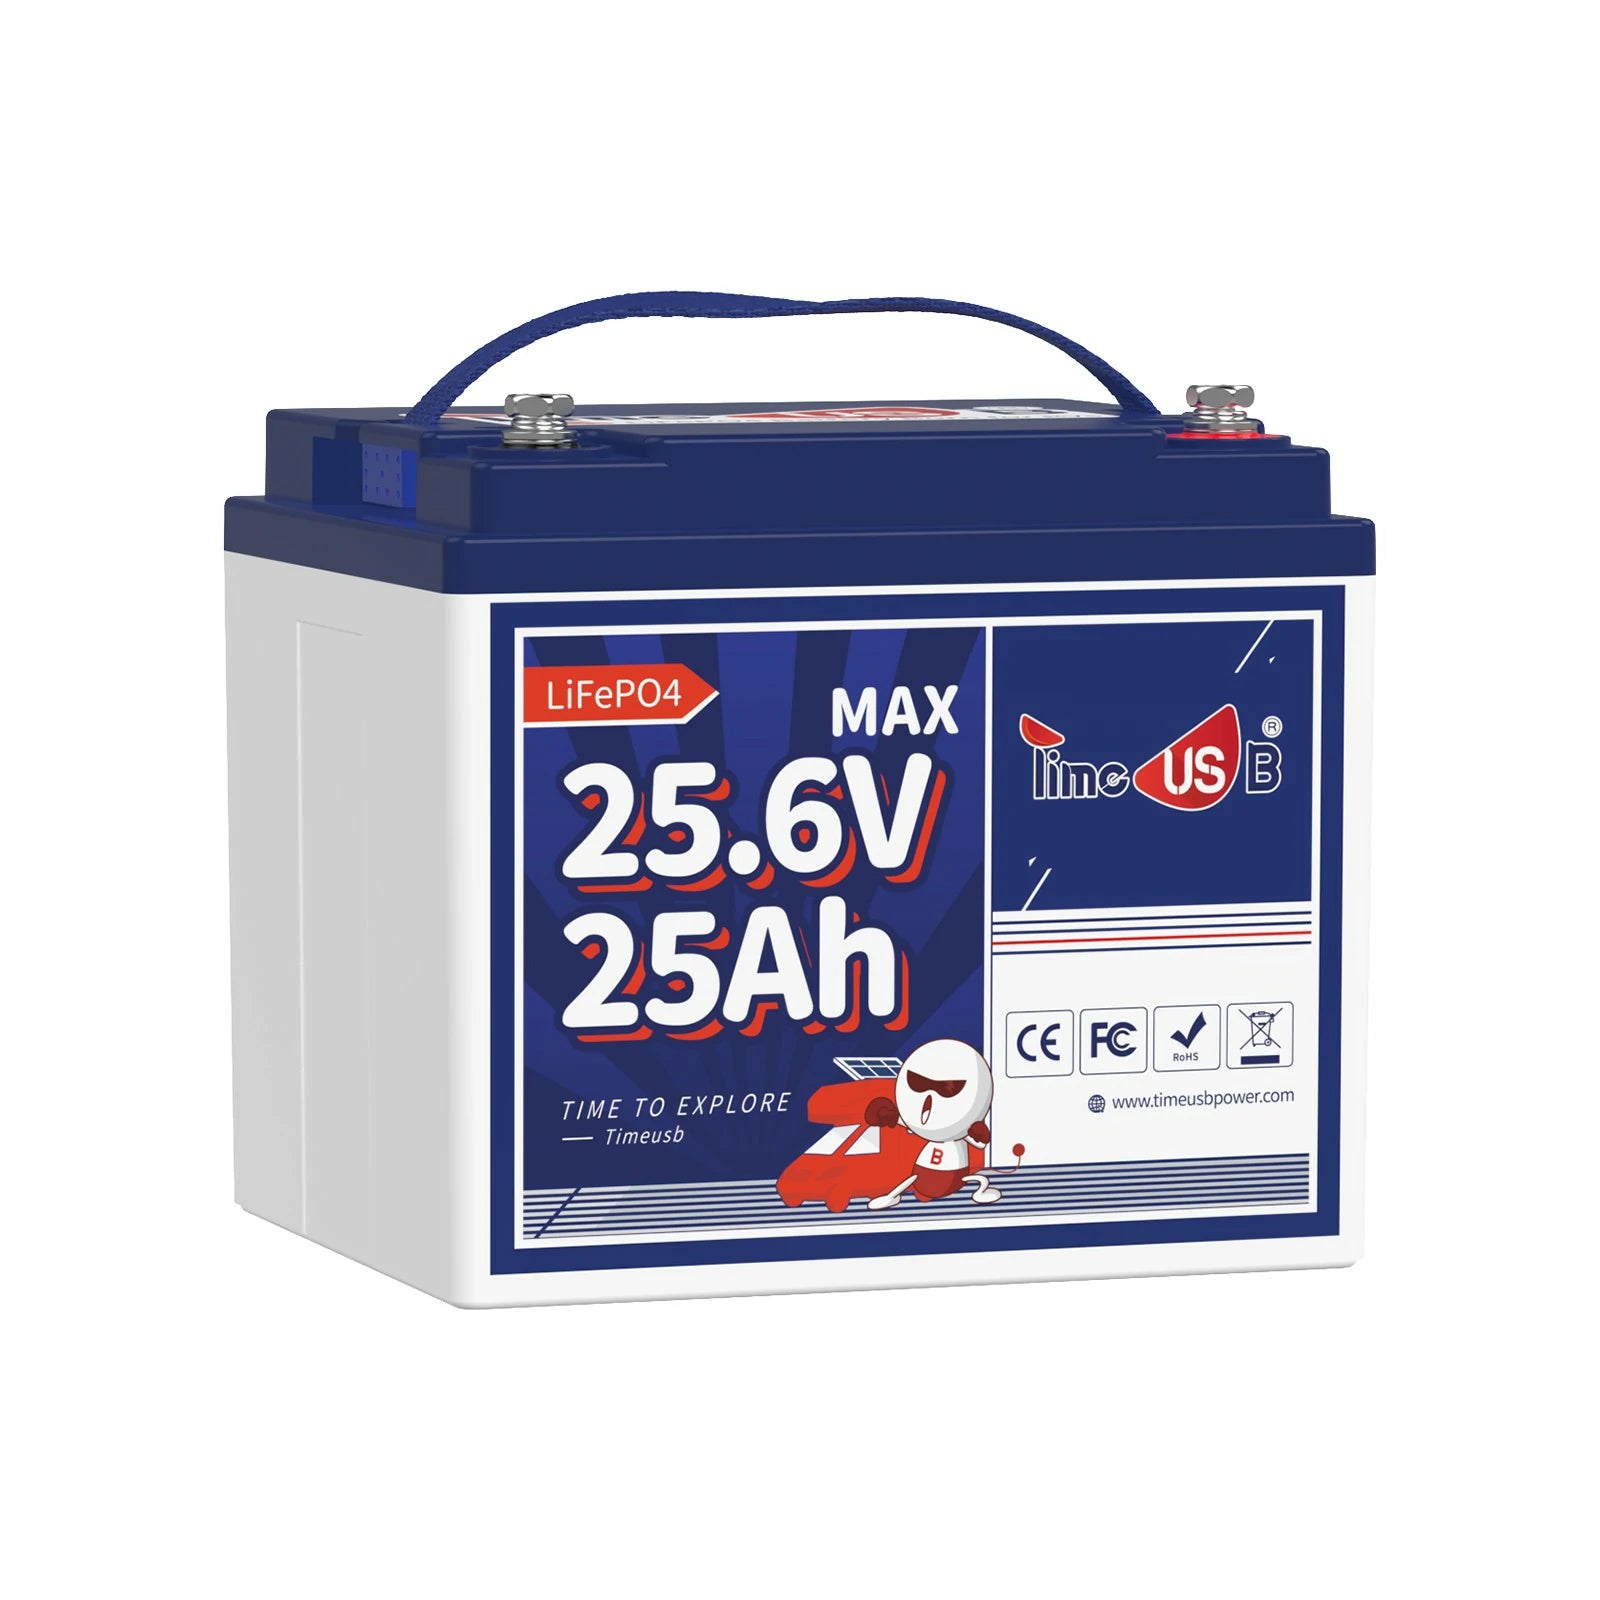 24V 25Ah LiFePO4 Battery, 2C High Discharge Rate Built-in 50A BMS 640Wh Deep Cycle Battery, 1280W Continuous Load Power Perfect for Farm Equipment, Mobility Scooters, Electric Wheelchairs etc